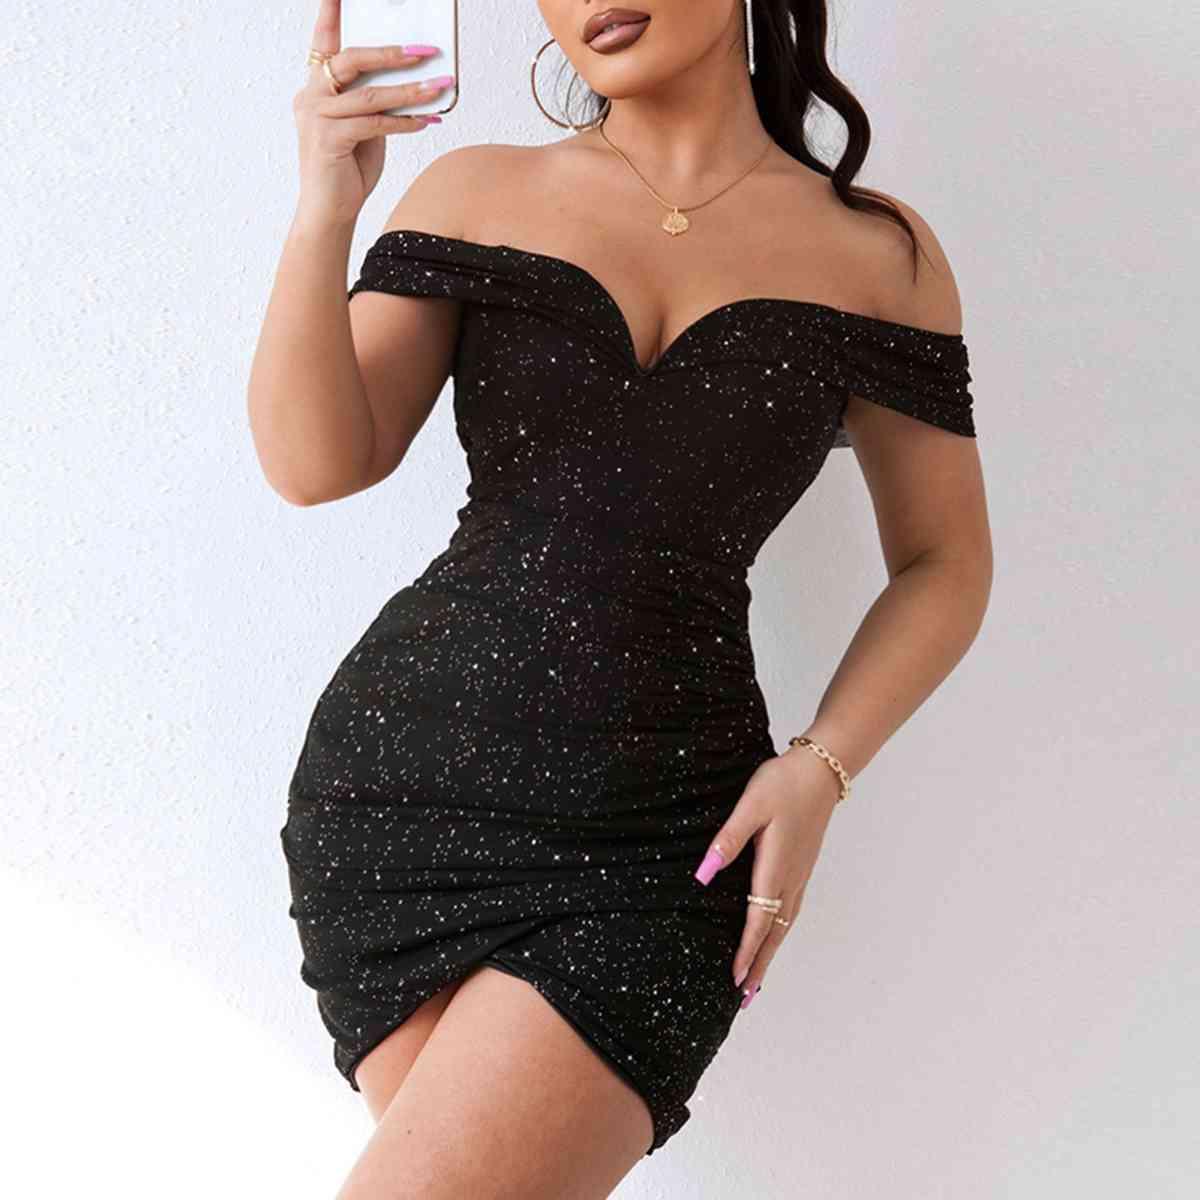 a woman in a short black dress holding a glass of wine